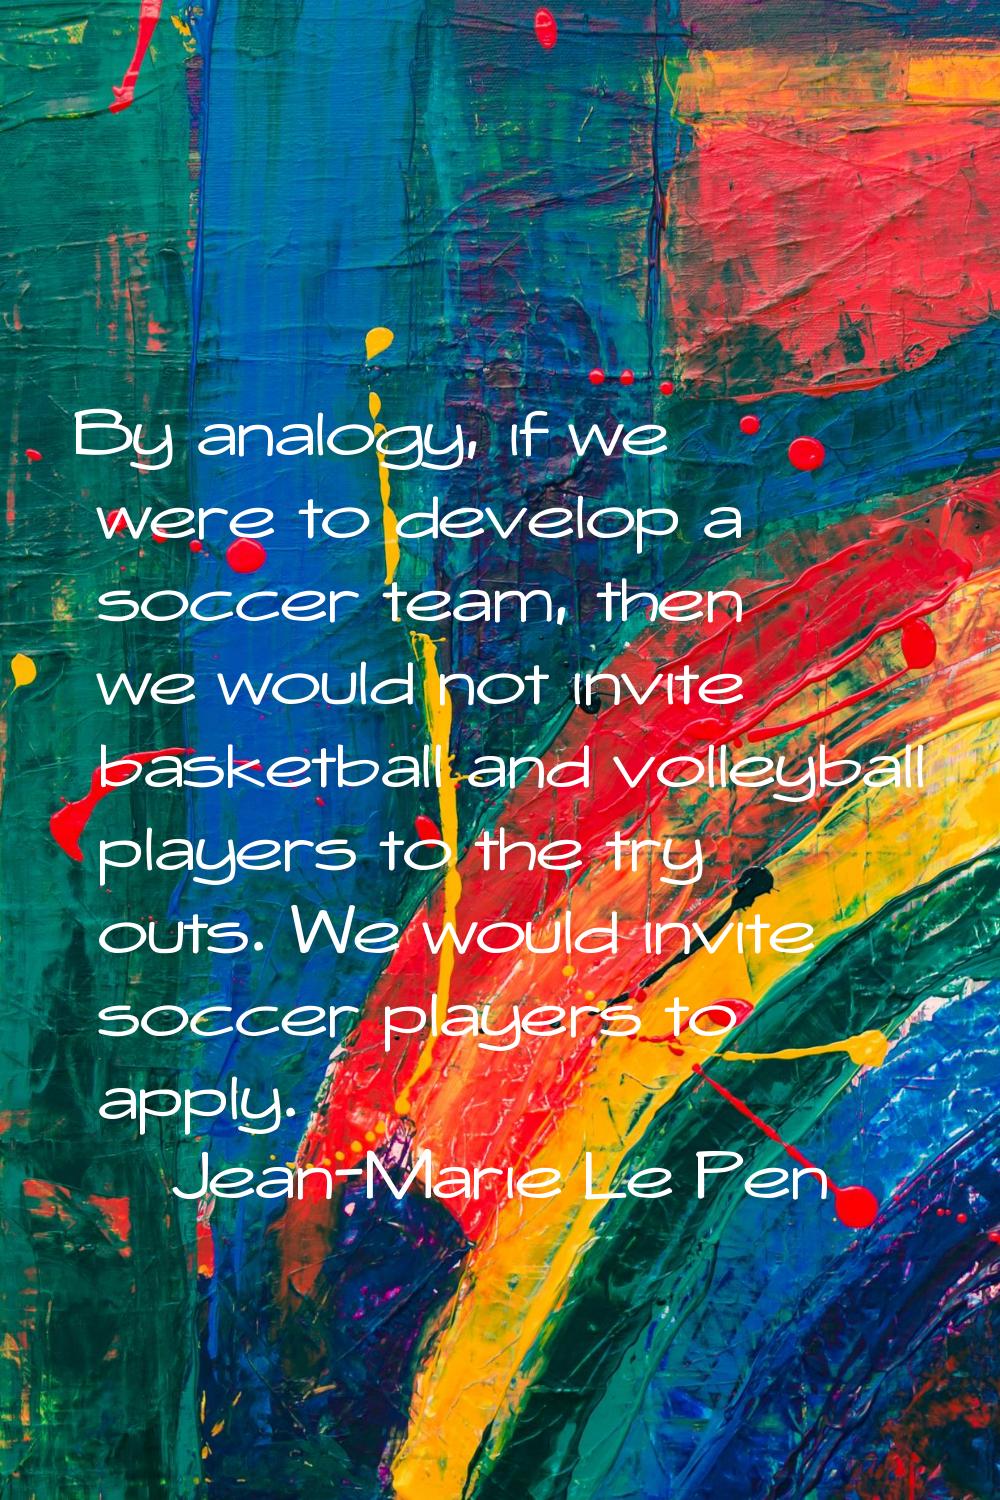 By analogy, if we were to develop a soccer team, then we would not invite basketball and volleyball